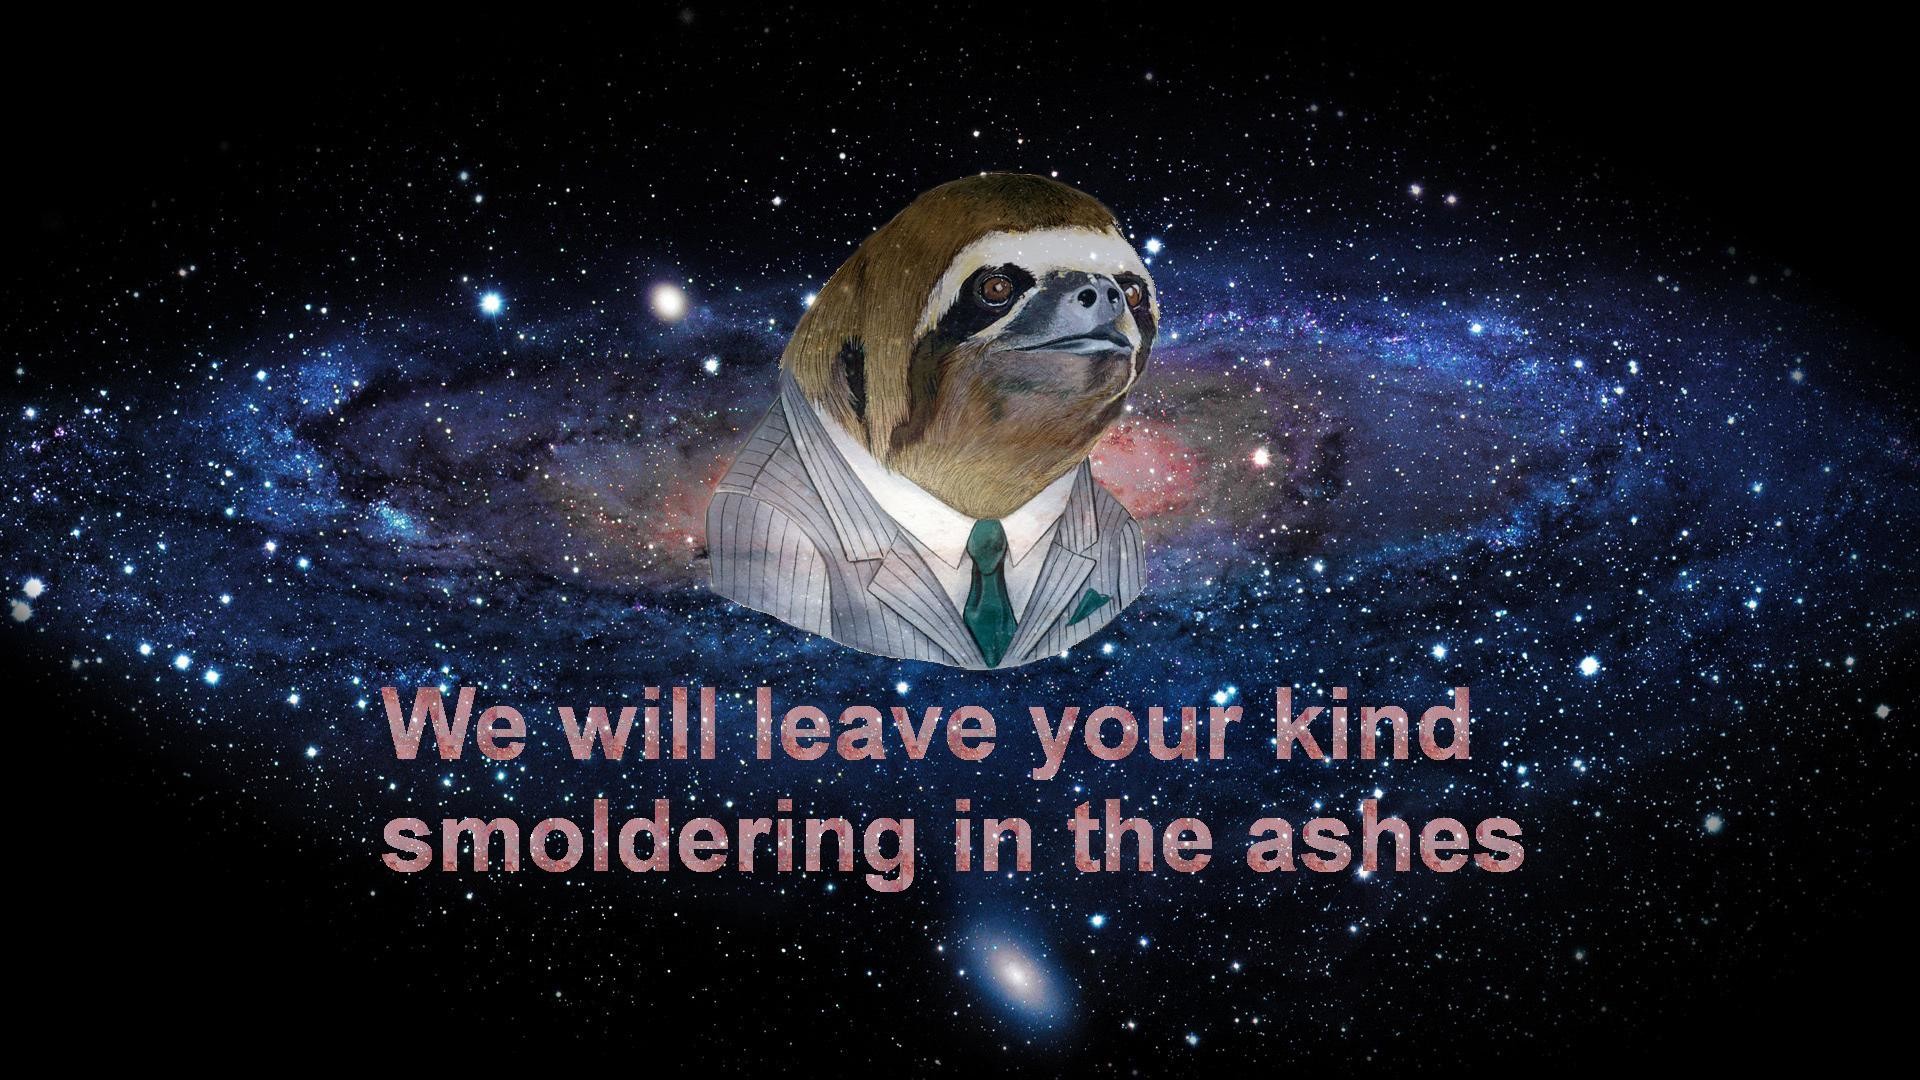 1920x1080 We will leave your kind smoldering in the ashes